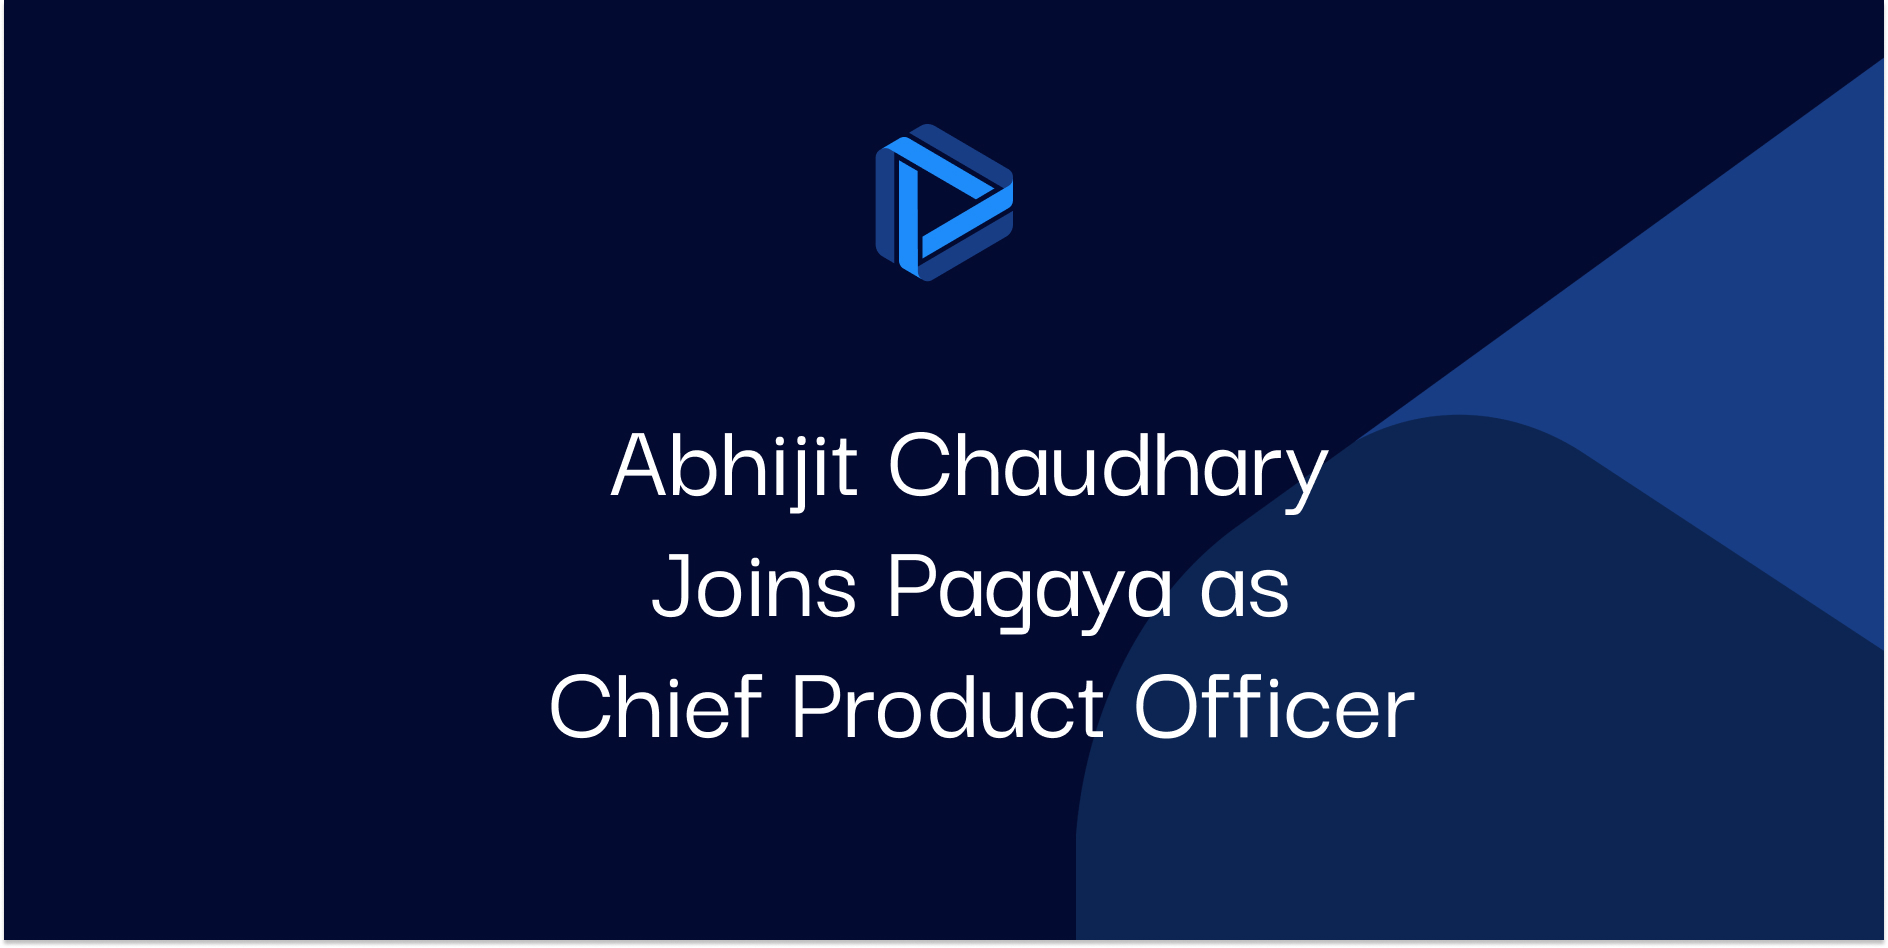 Abhijit Chaudhary Joins Pagaya as Chief Product Officer